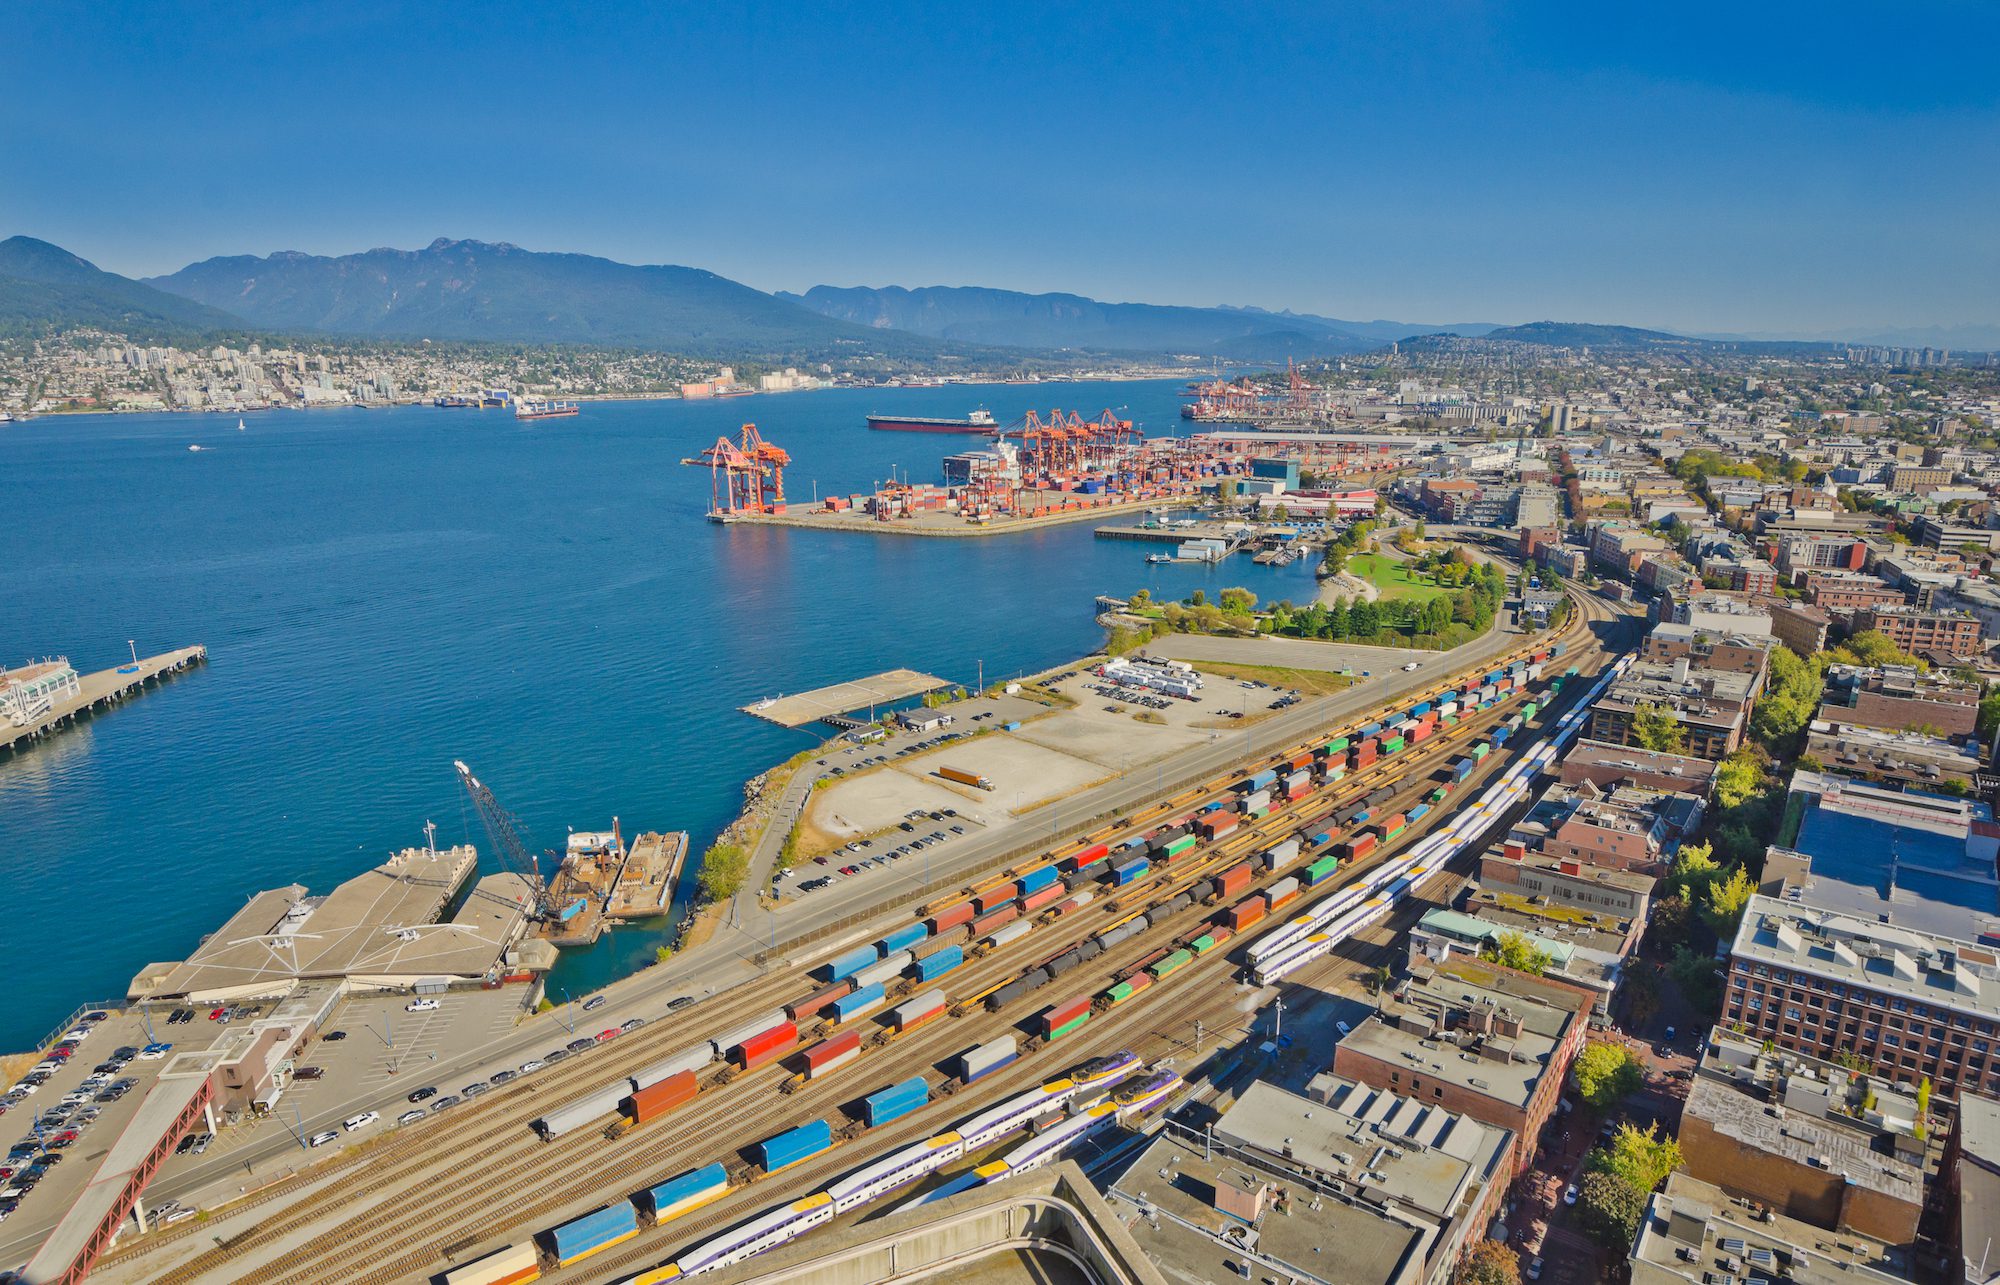 anoramic view city of Vancouver with the container port terminal and freight station with trains, oil-cars, tank-cars